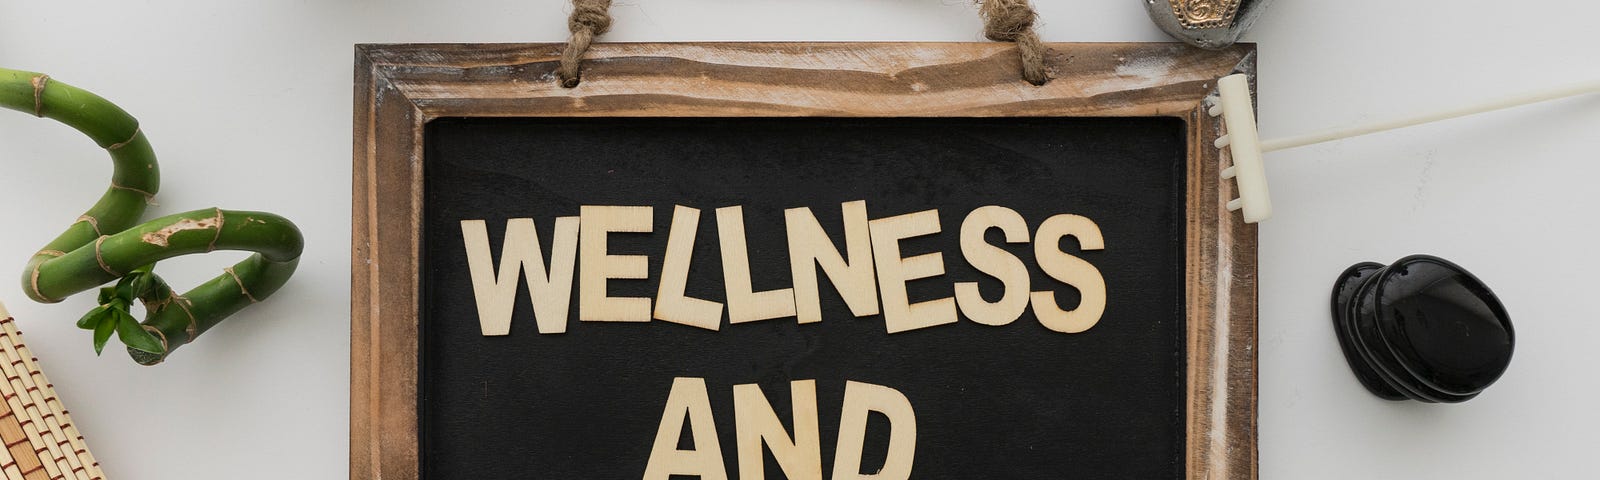 WELLNESS AND HEALTH written in all cap letters on a wood-framed board surrounded by curly bamboo, Buddha statues, succulent plants, balancing hot stones, rolled straw placemat, and incense in stone holder. Zen feel.